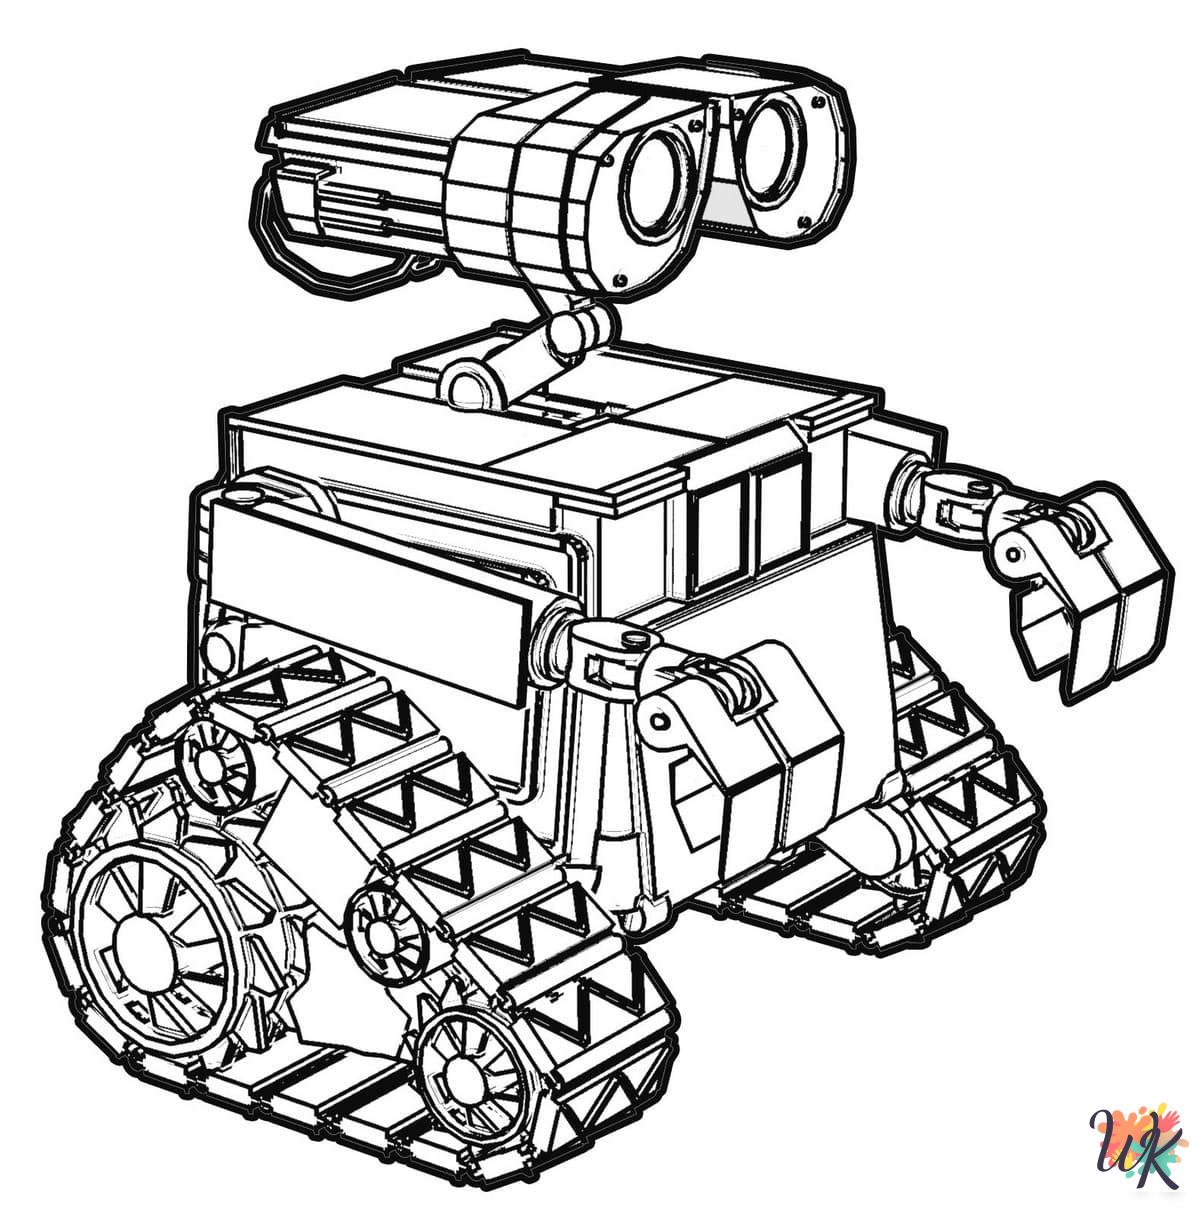 WALL-E themed coloring pages